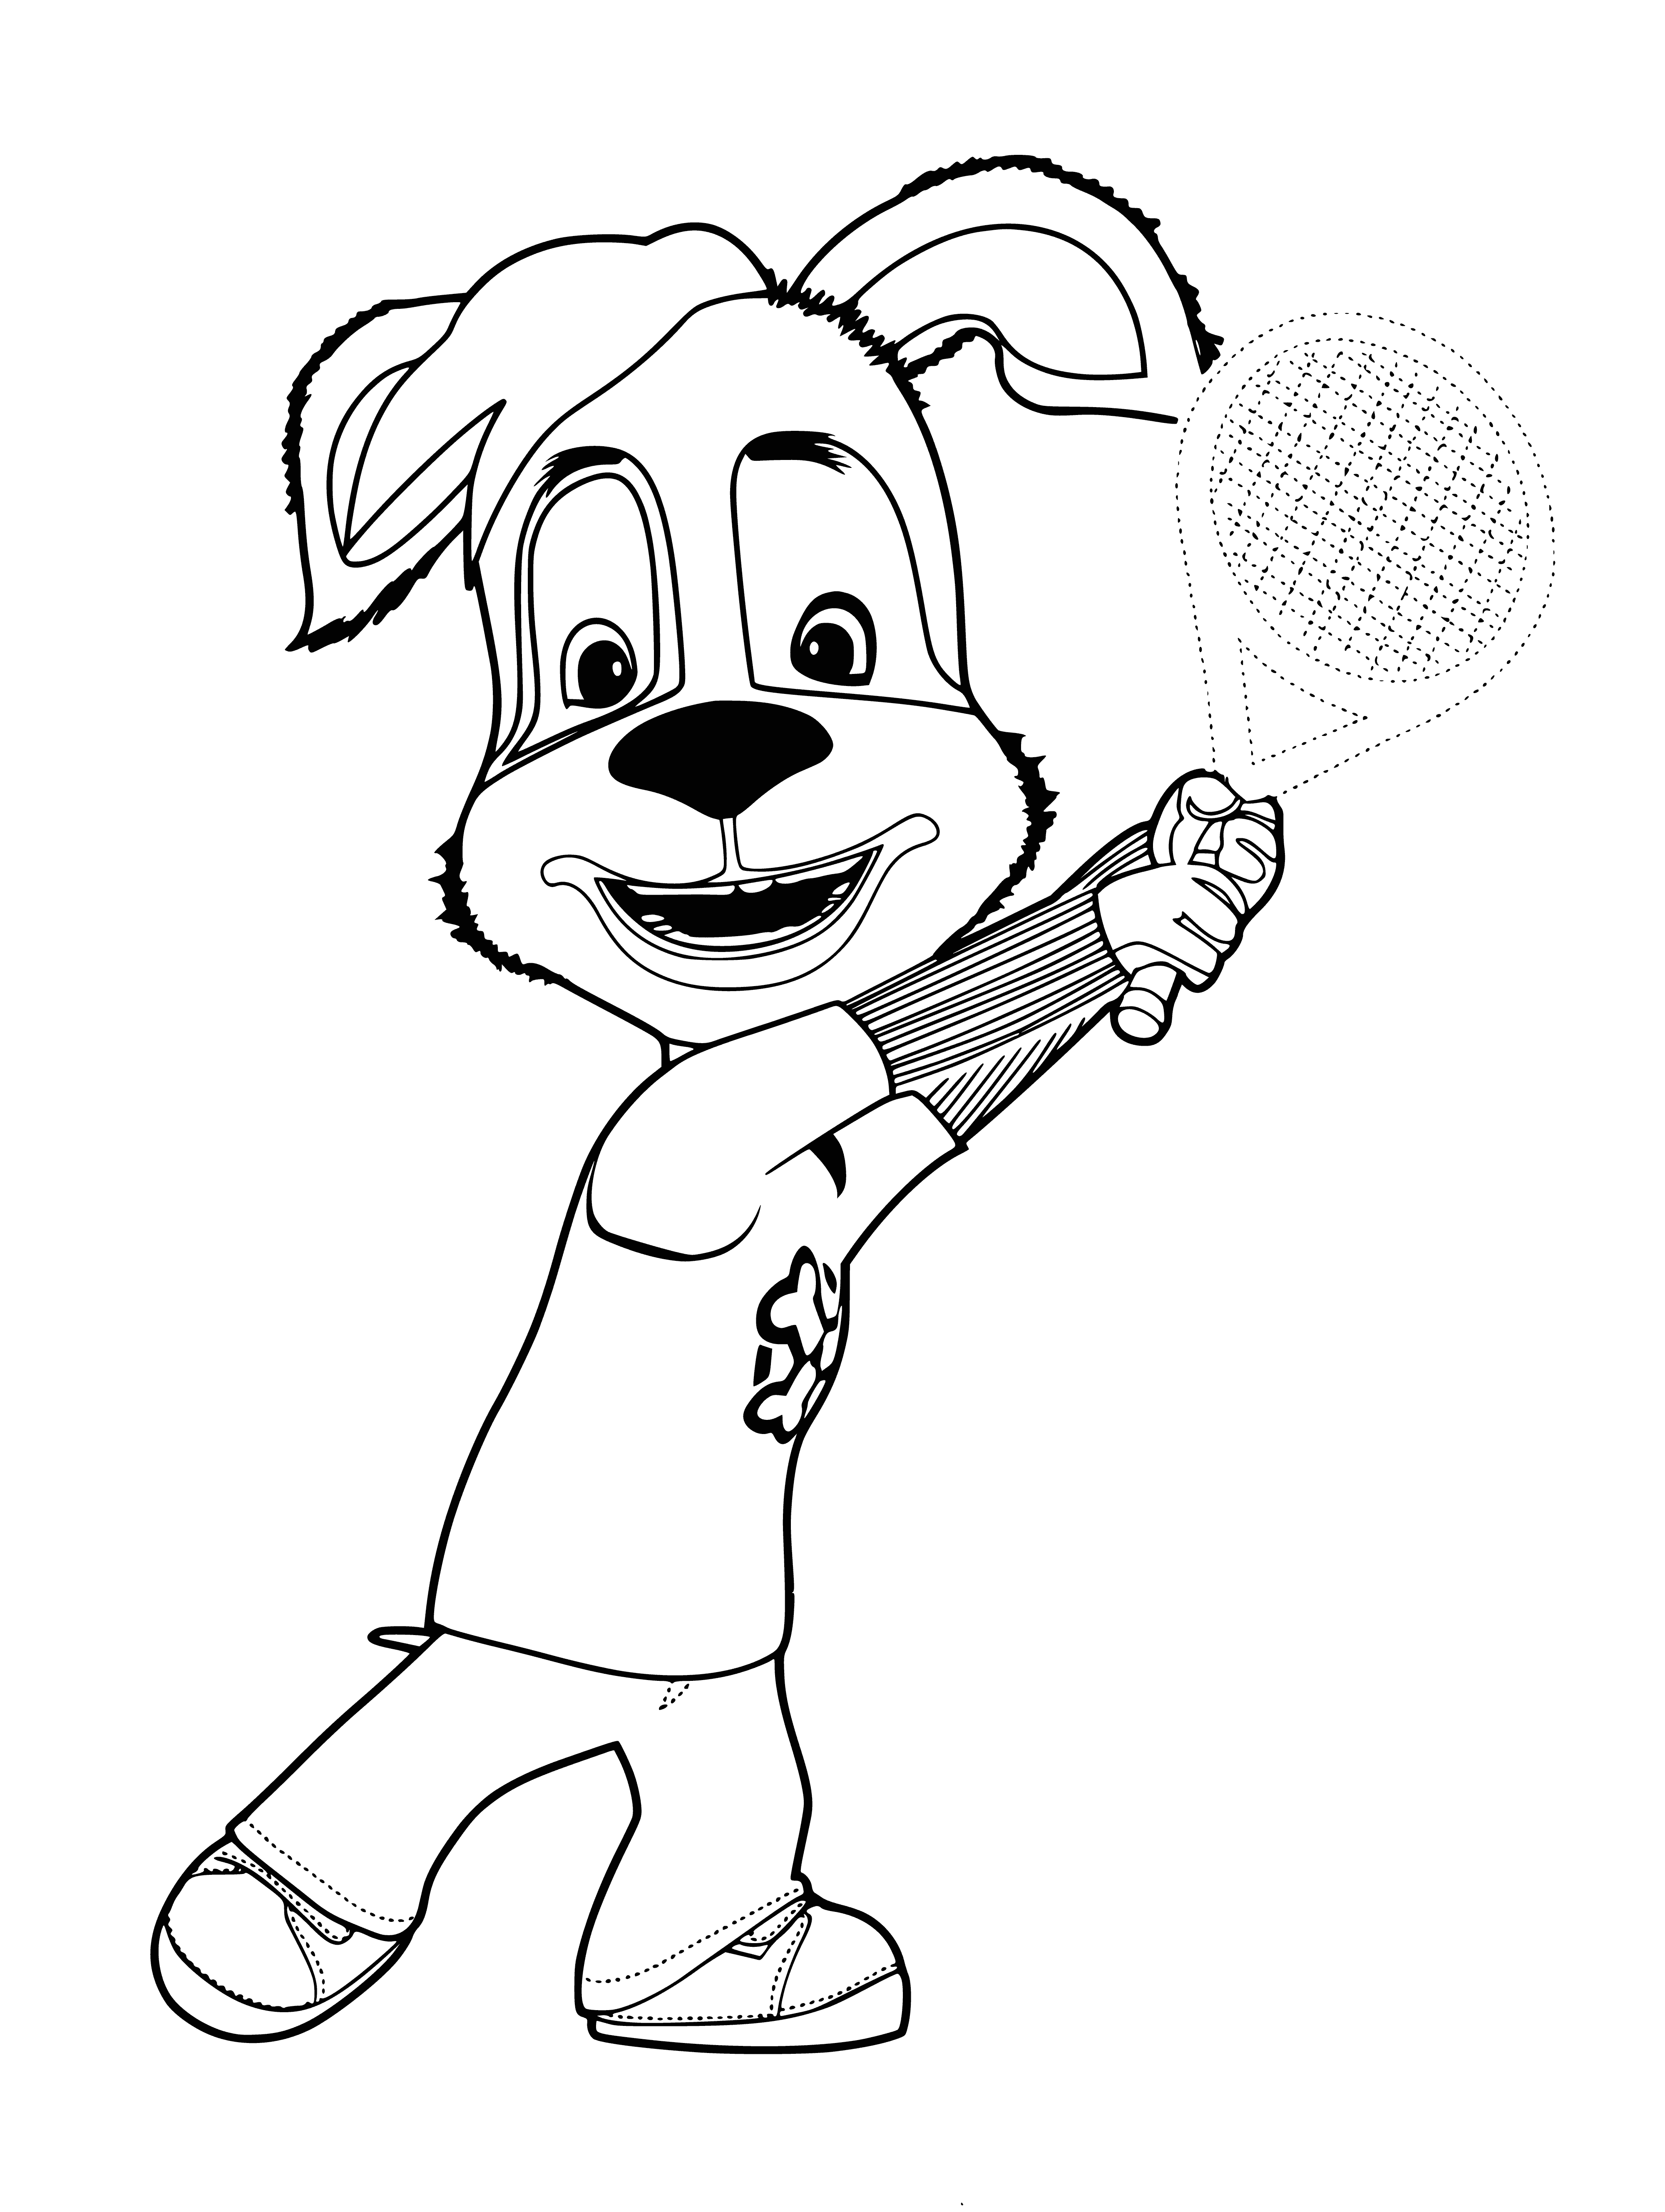 Buddy with a racket coloring page